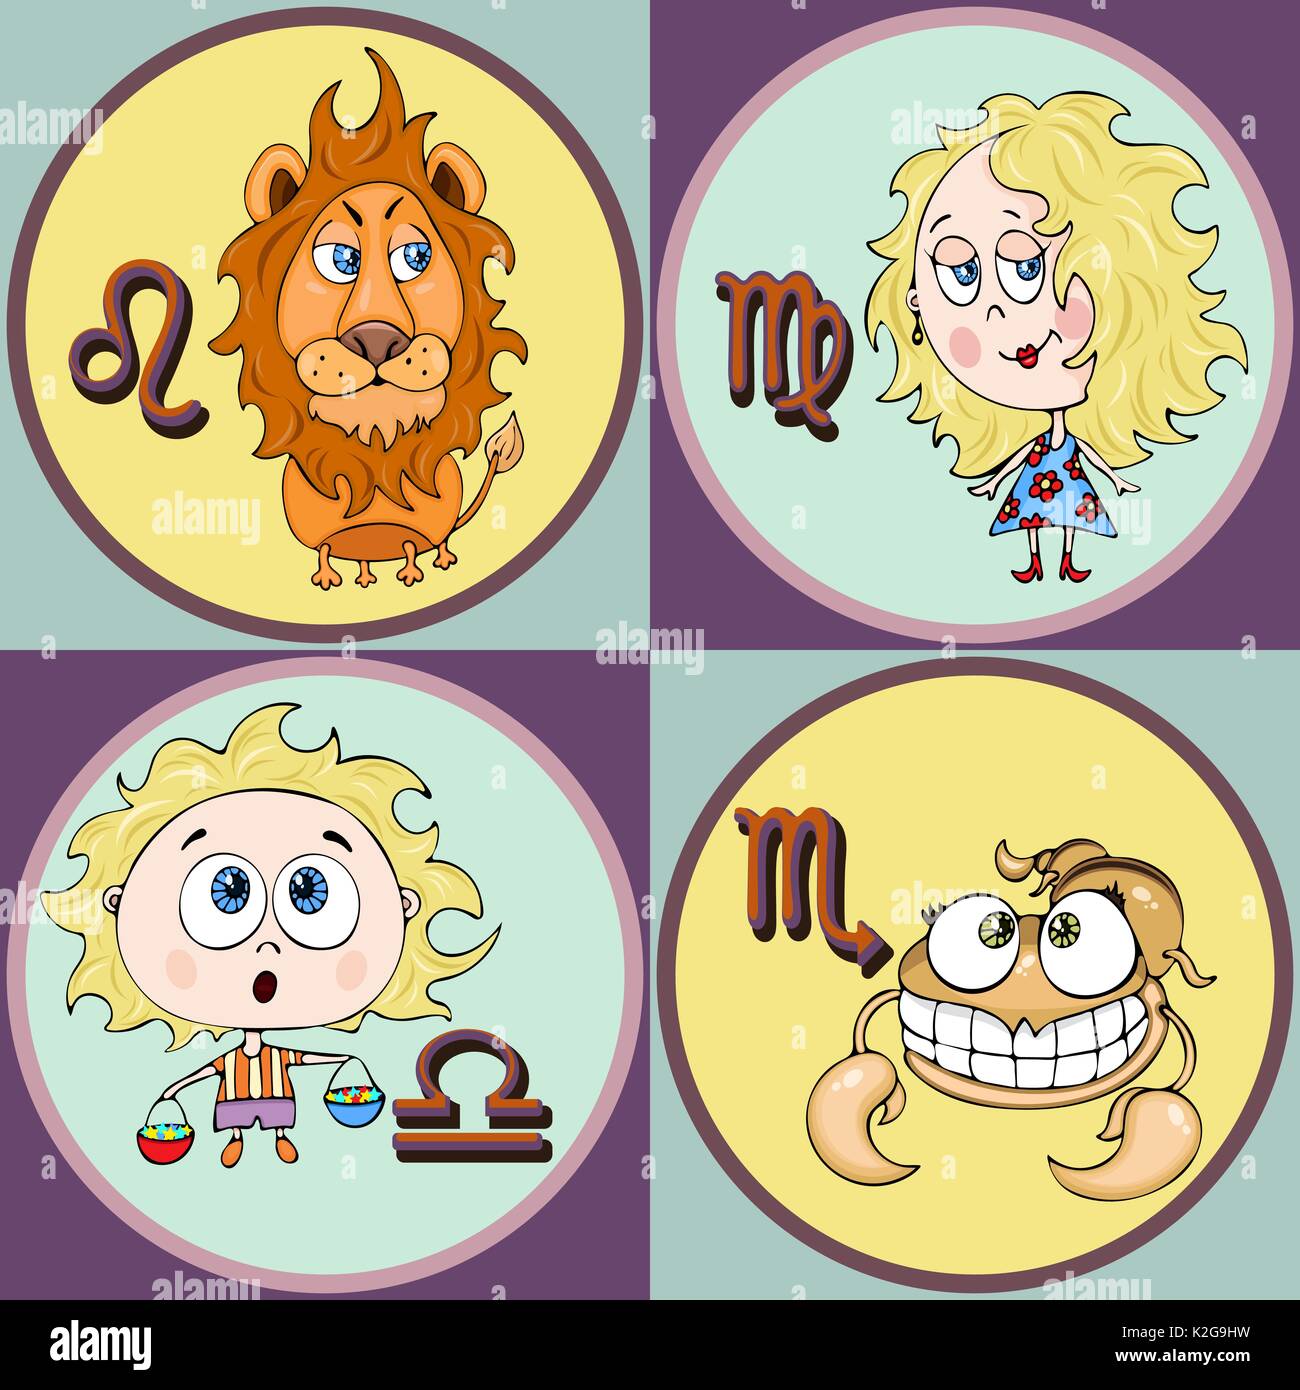 Set zodiac sign cartoon, Leo, Virgo, Libra, Scorpio. Painted funny astrological characters and symbols in a round frame multicolored on colorful backg Stock Vector